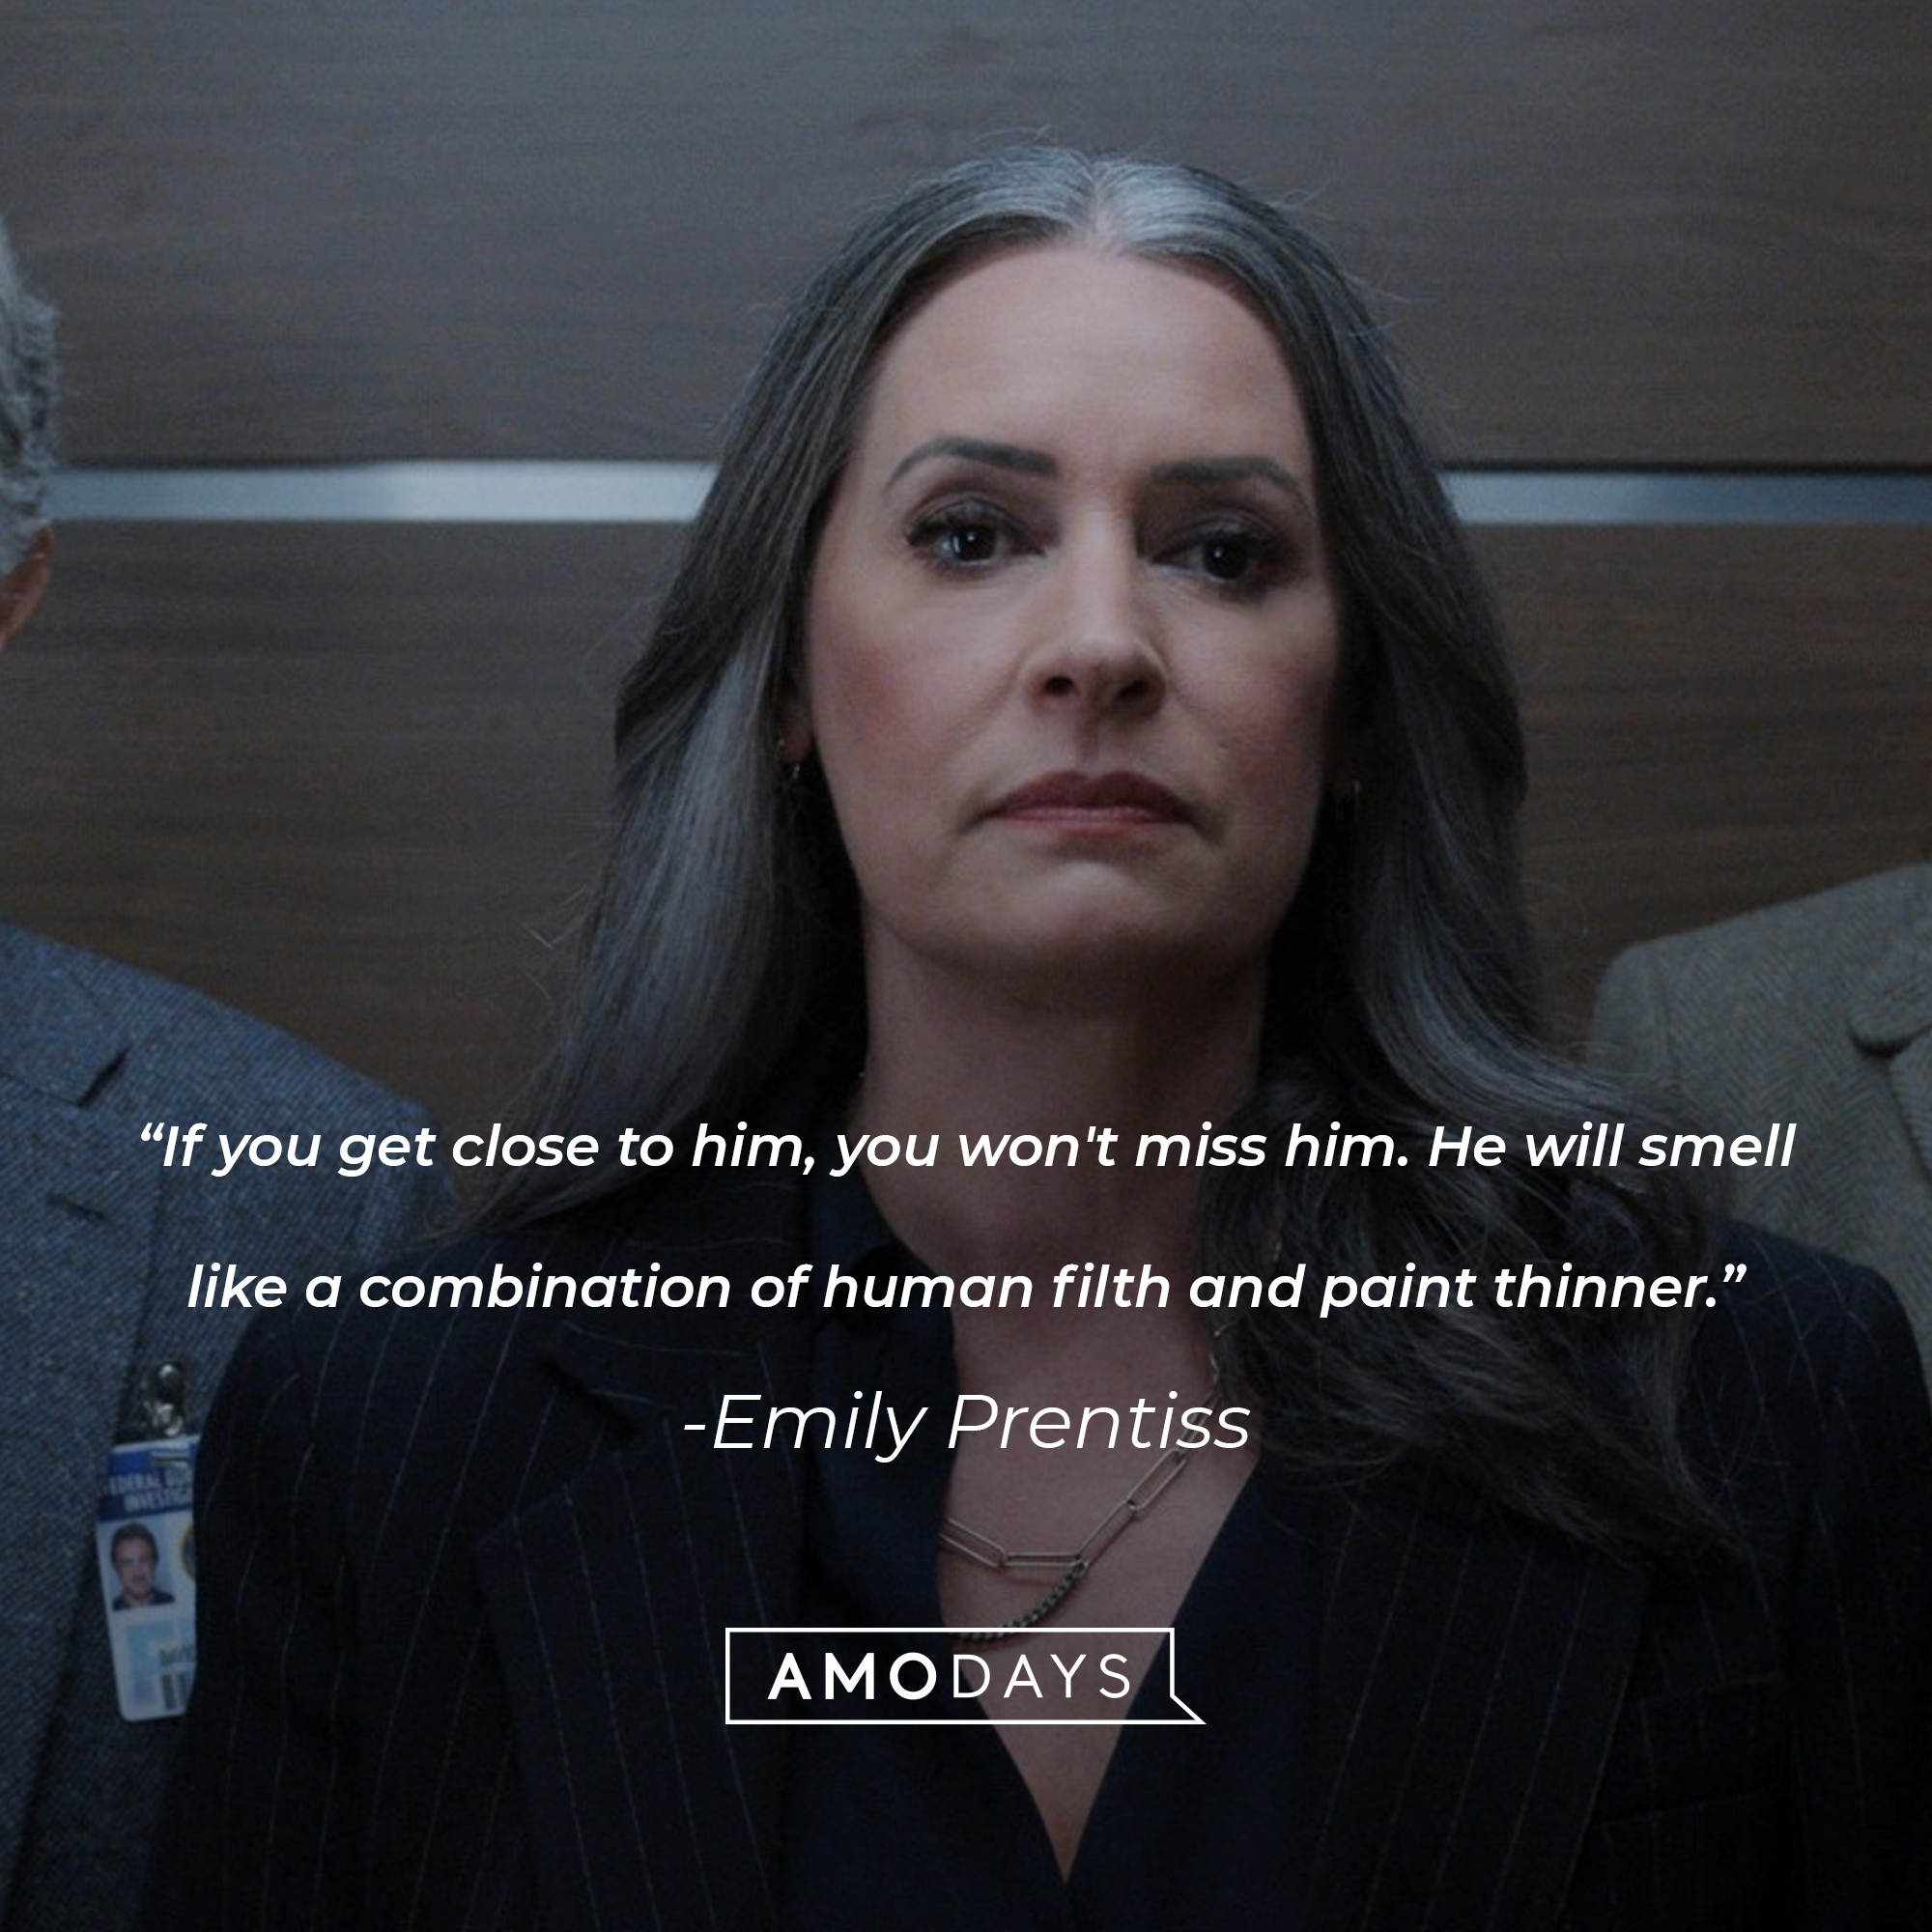 Emily Prentiss' quote: "If you get close to him, you won't miss him. He will smell like a combination of human filth and paint thinner." | Source: Facebook.com/CriminalMinds